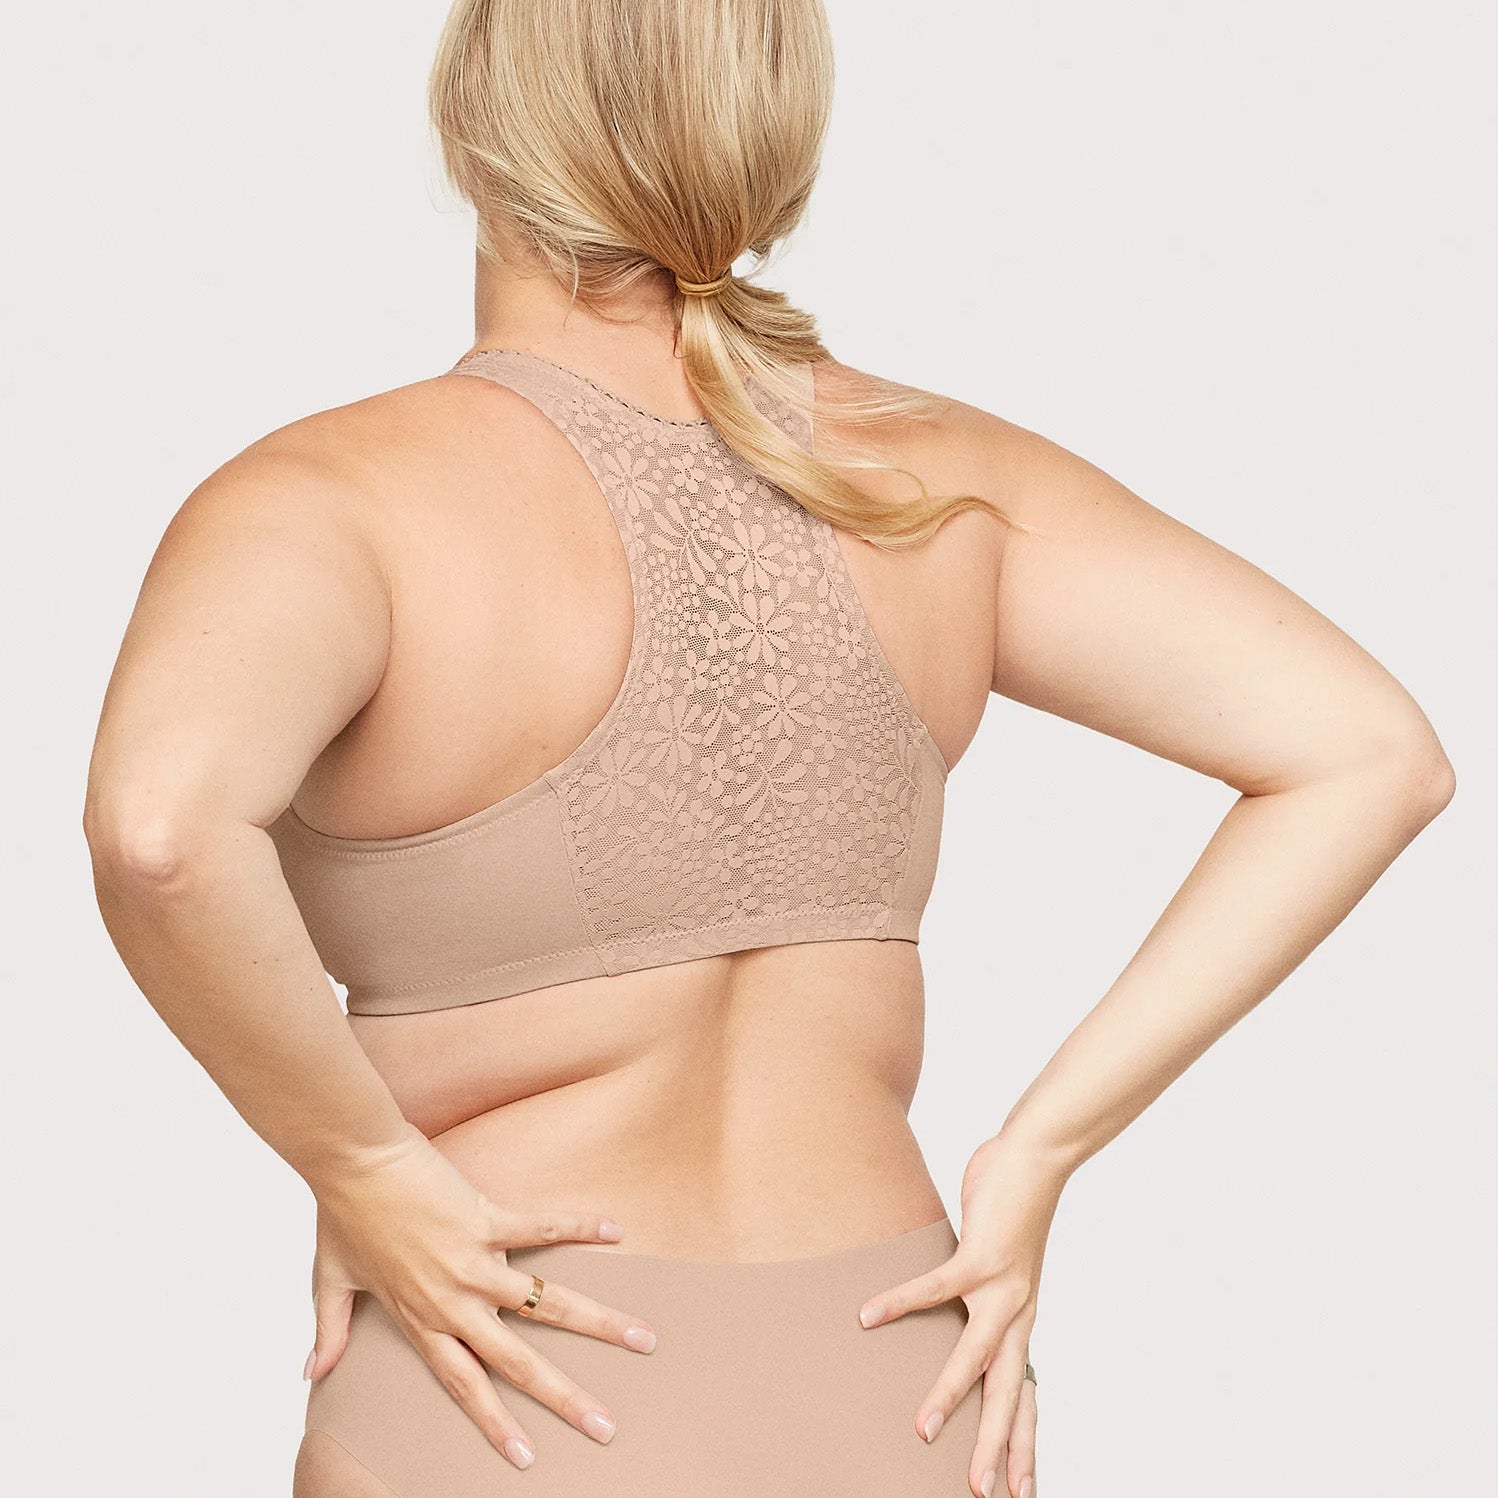 Sassy Road - Did you know that a bra that offers poor support can lead to  breast pain, and an ill-fitting bra can cause back, neck and shoulder pain,  as well as